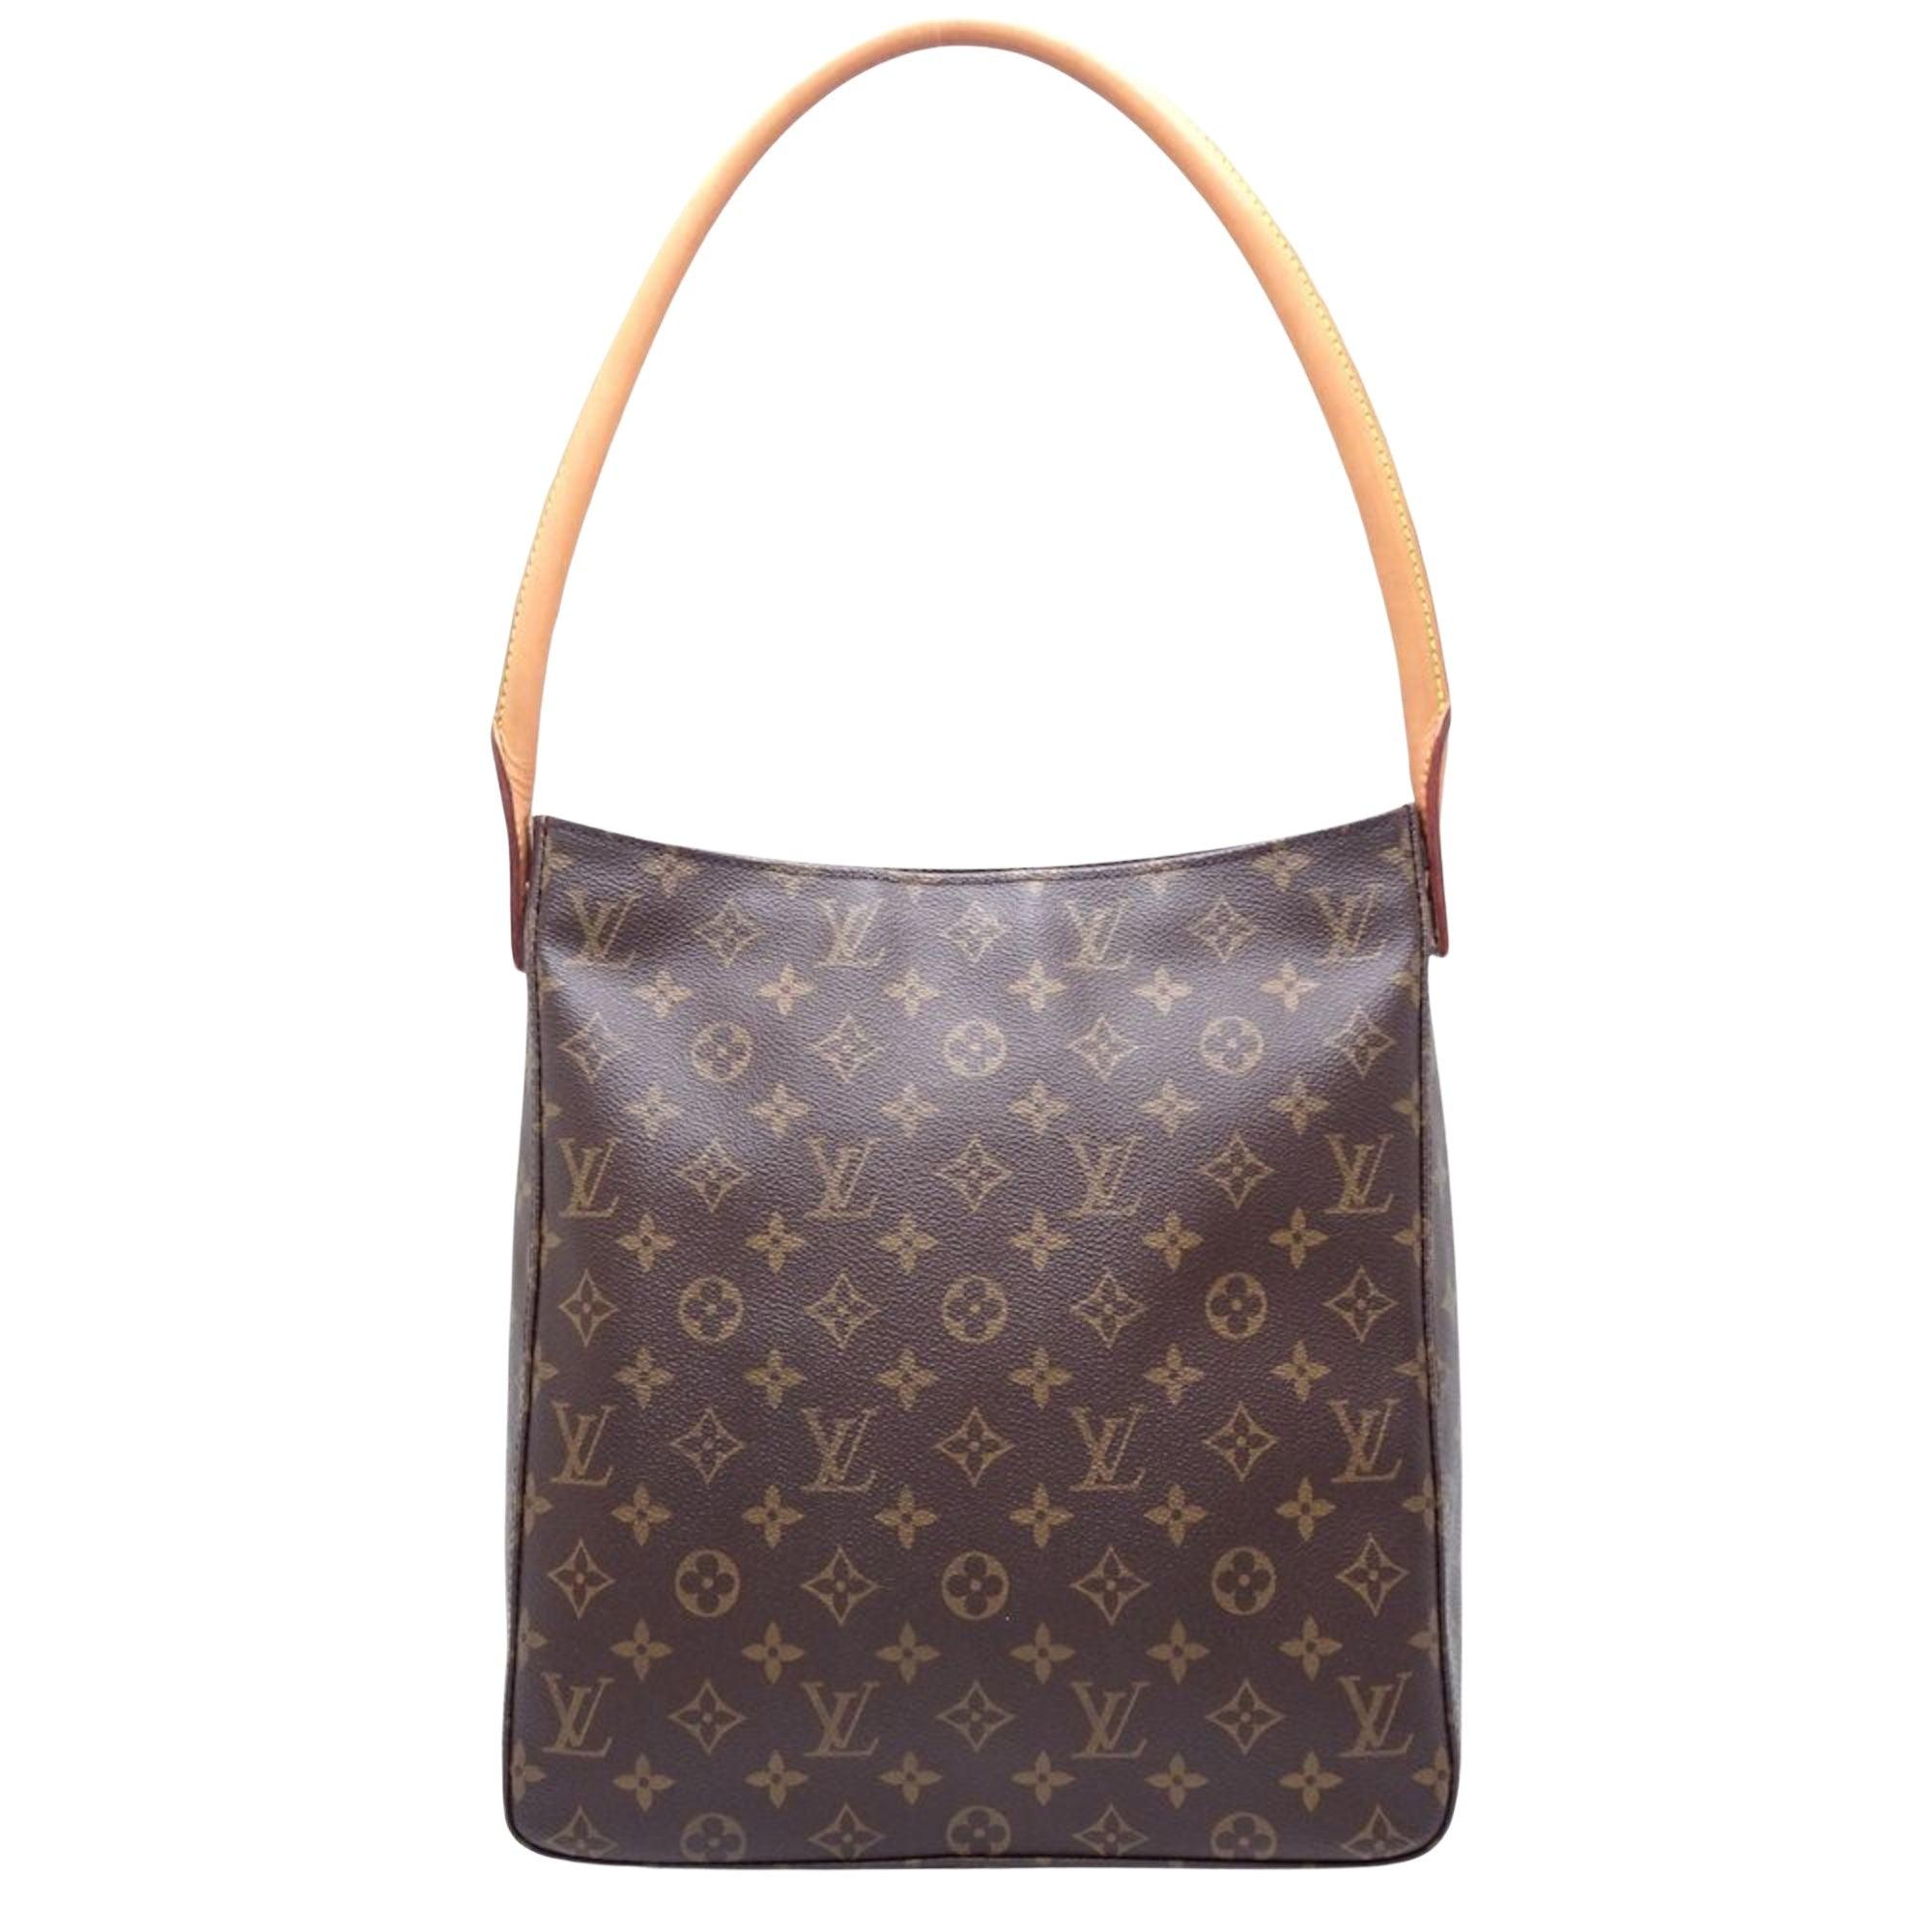 How does the warranty work for Louis Vuitton bags? - Quora